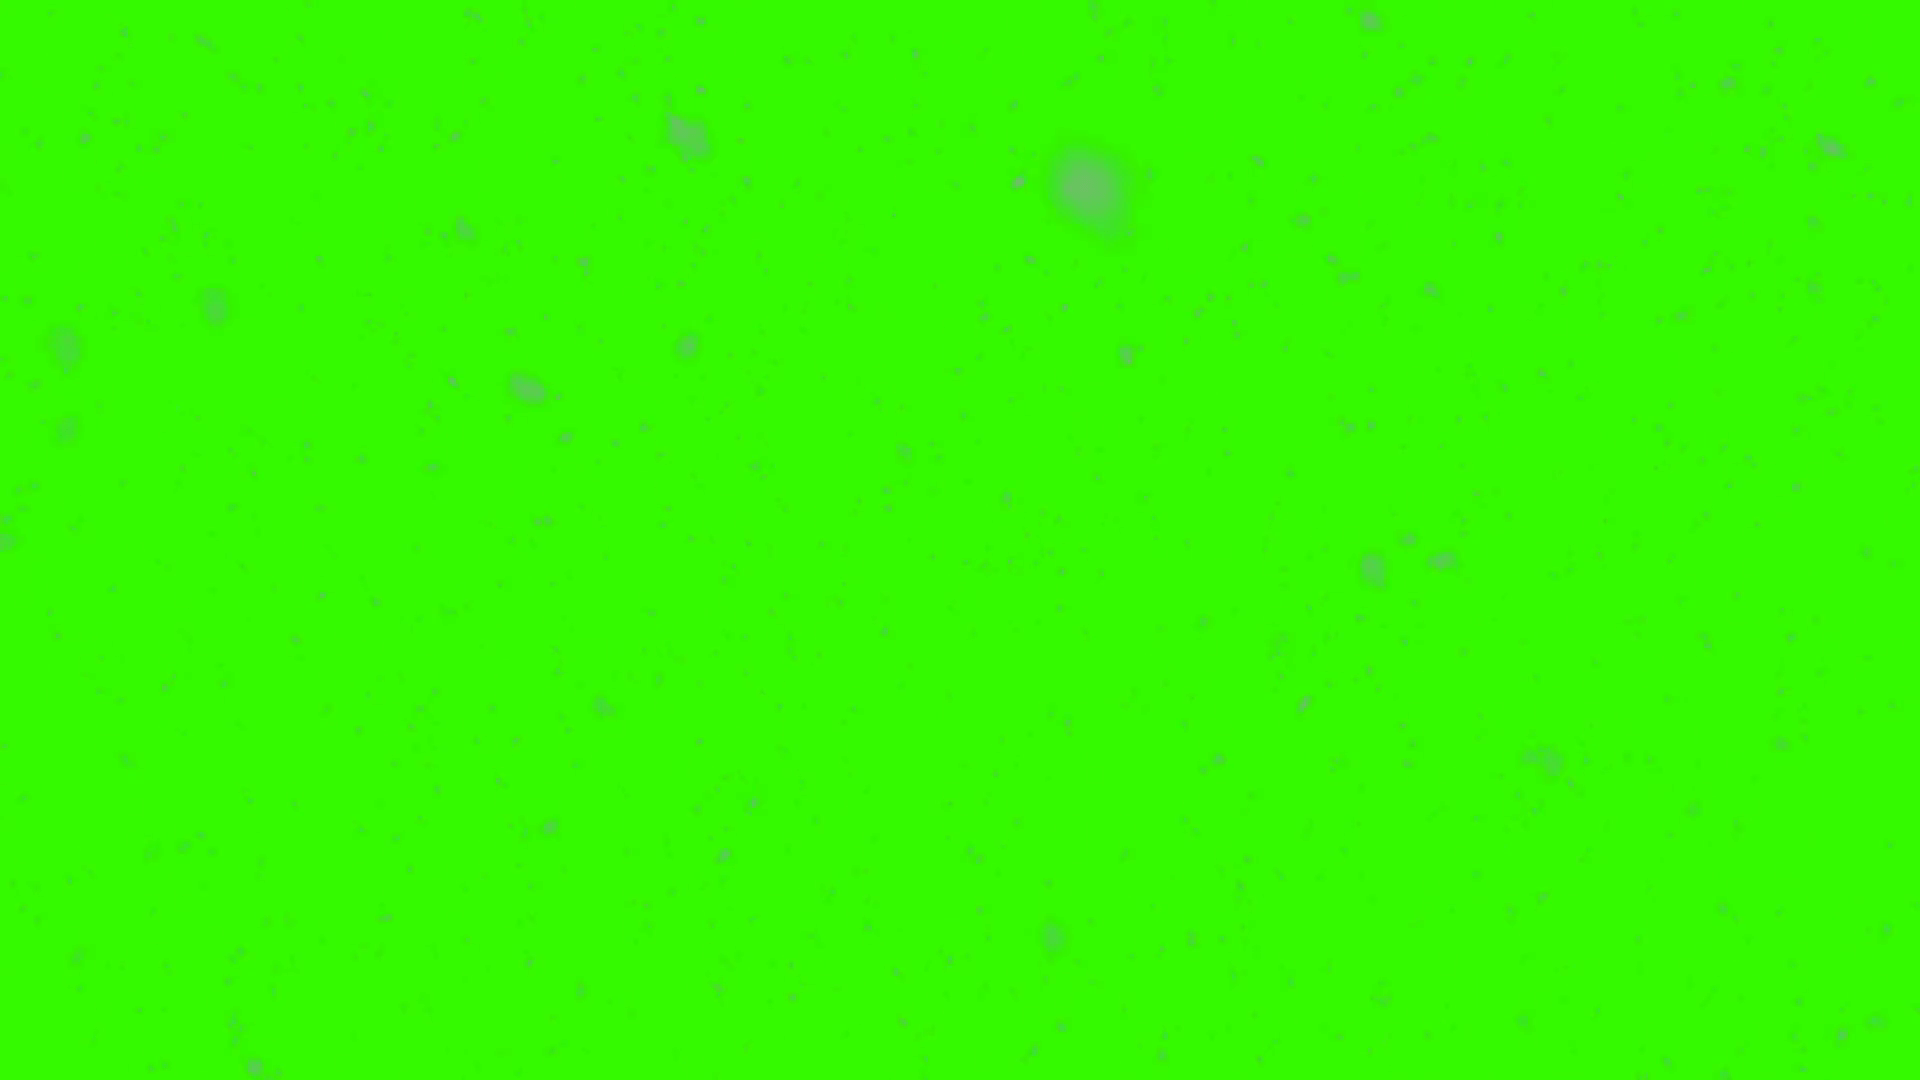 Realistic snowflakes snow storm green screen background